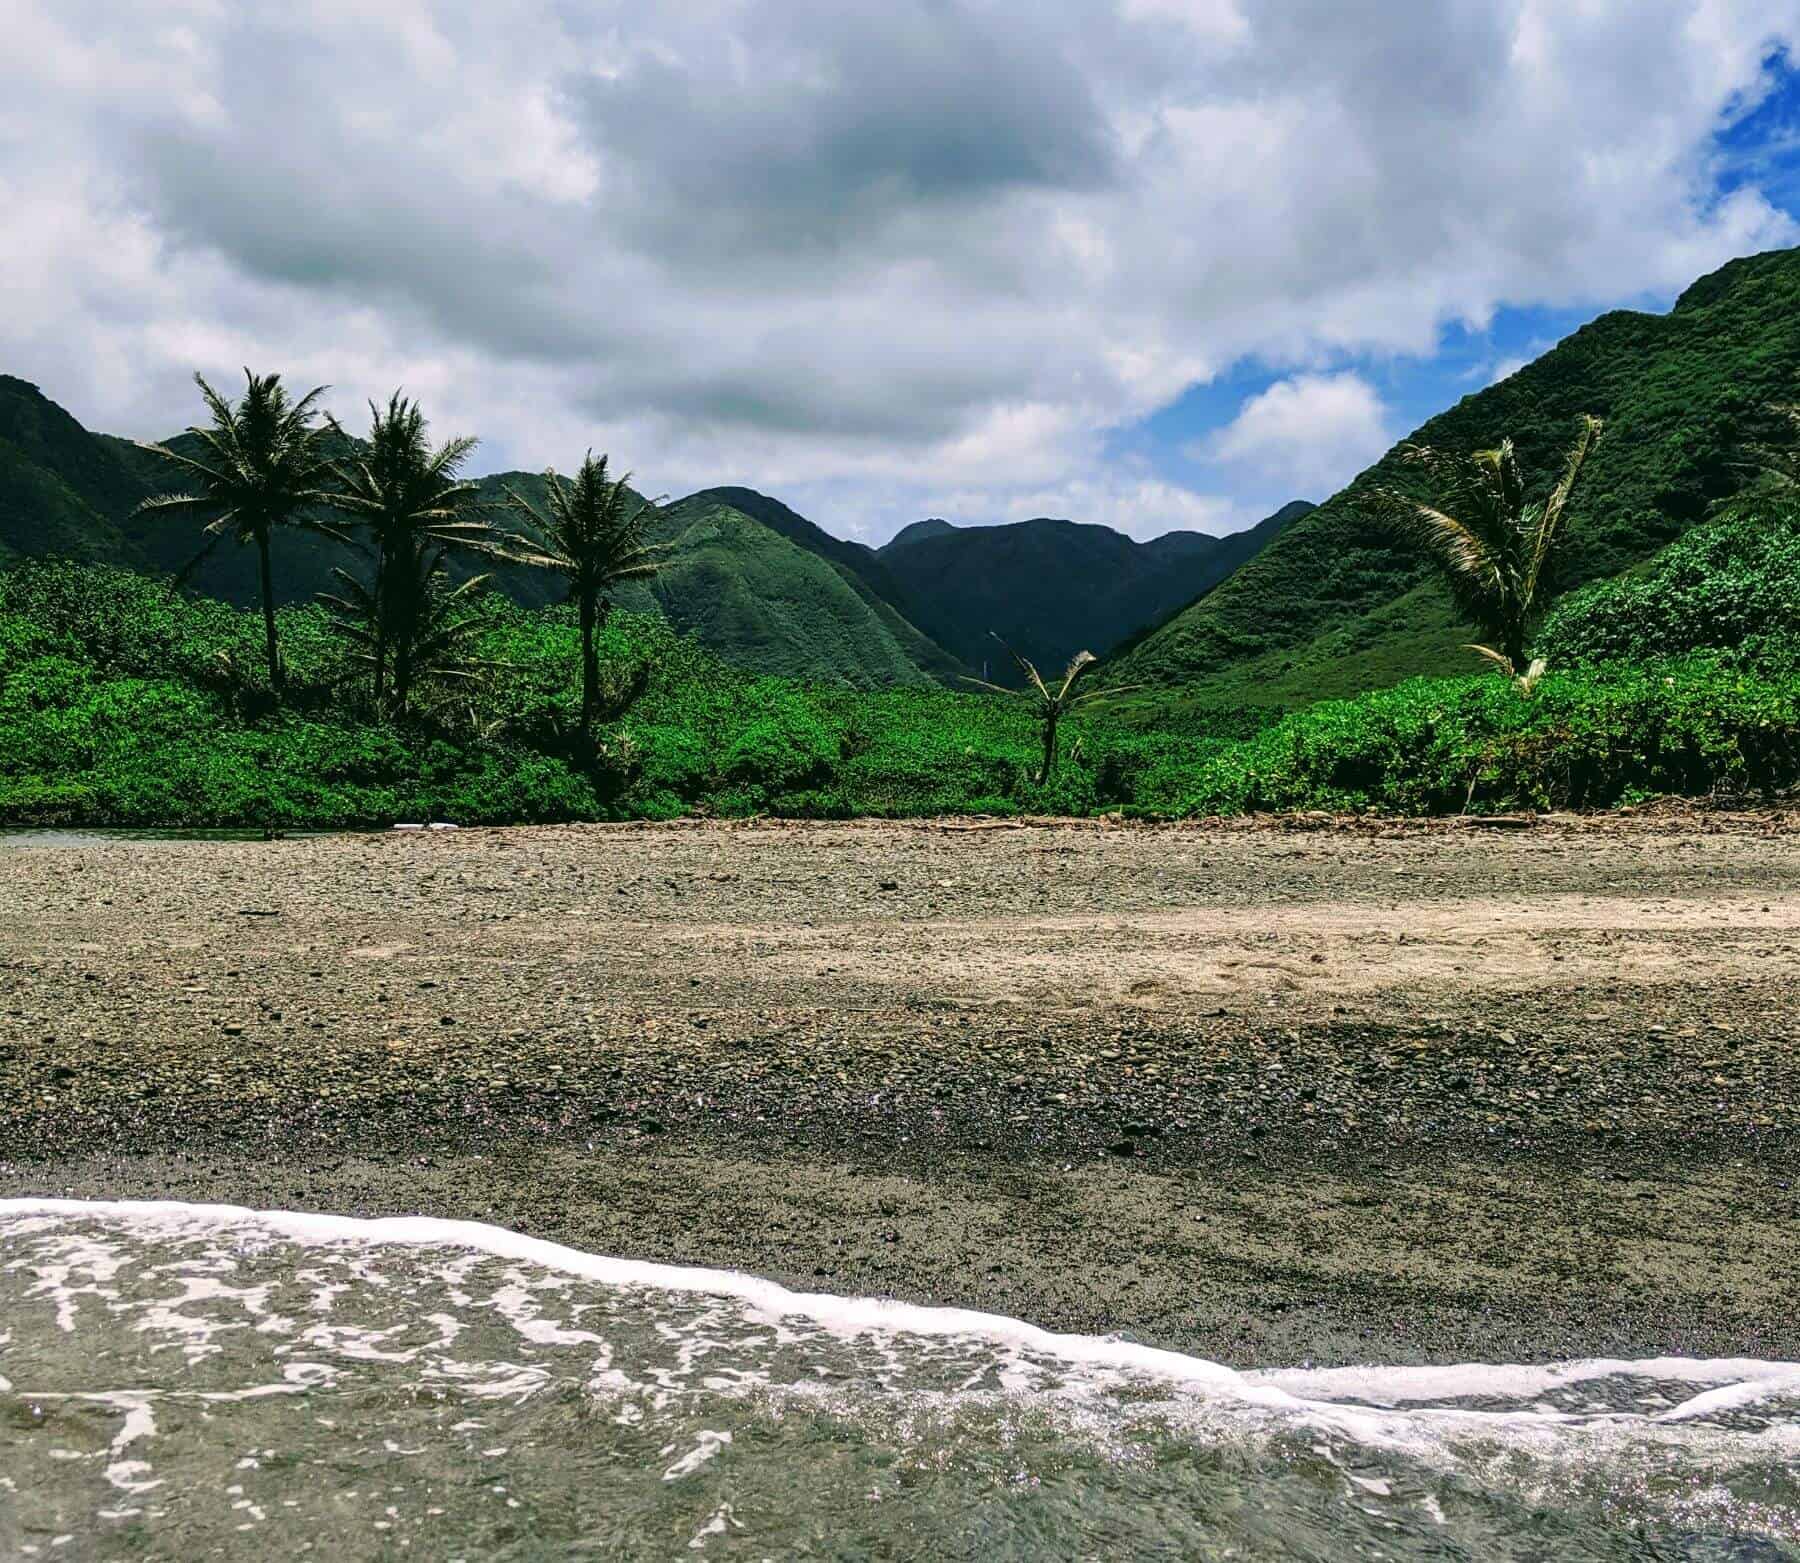 halawa valley forest and palm trees with beach